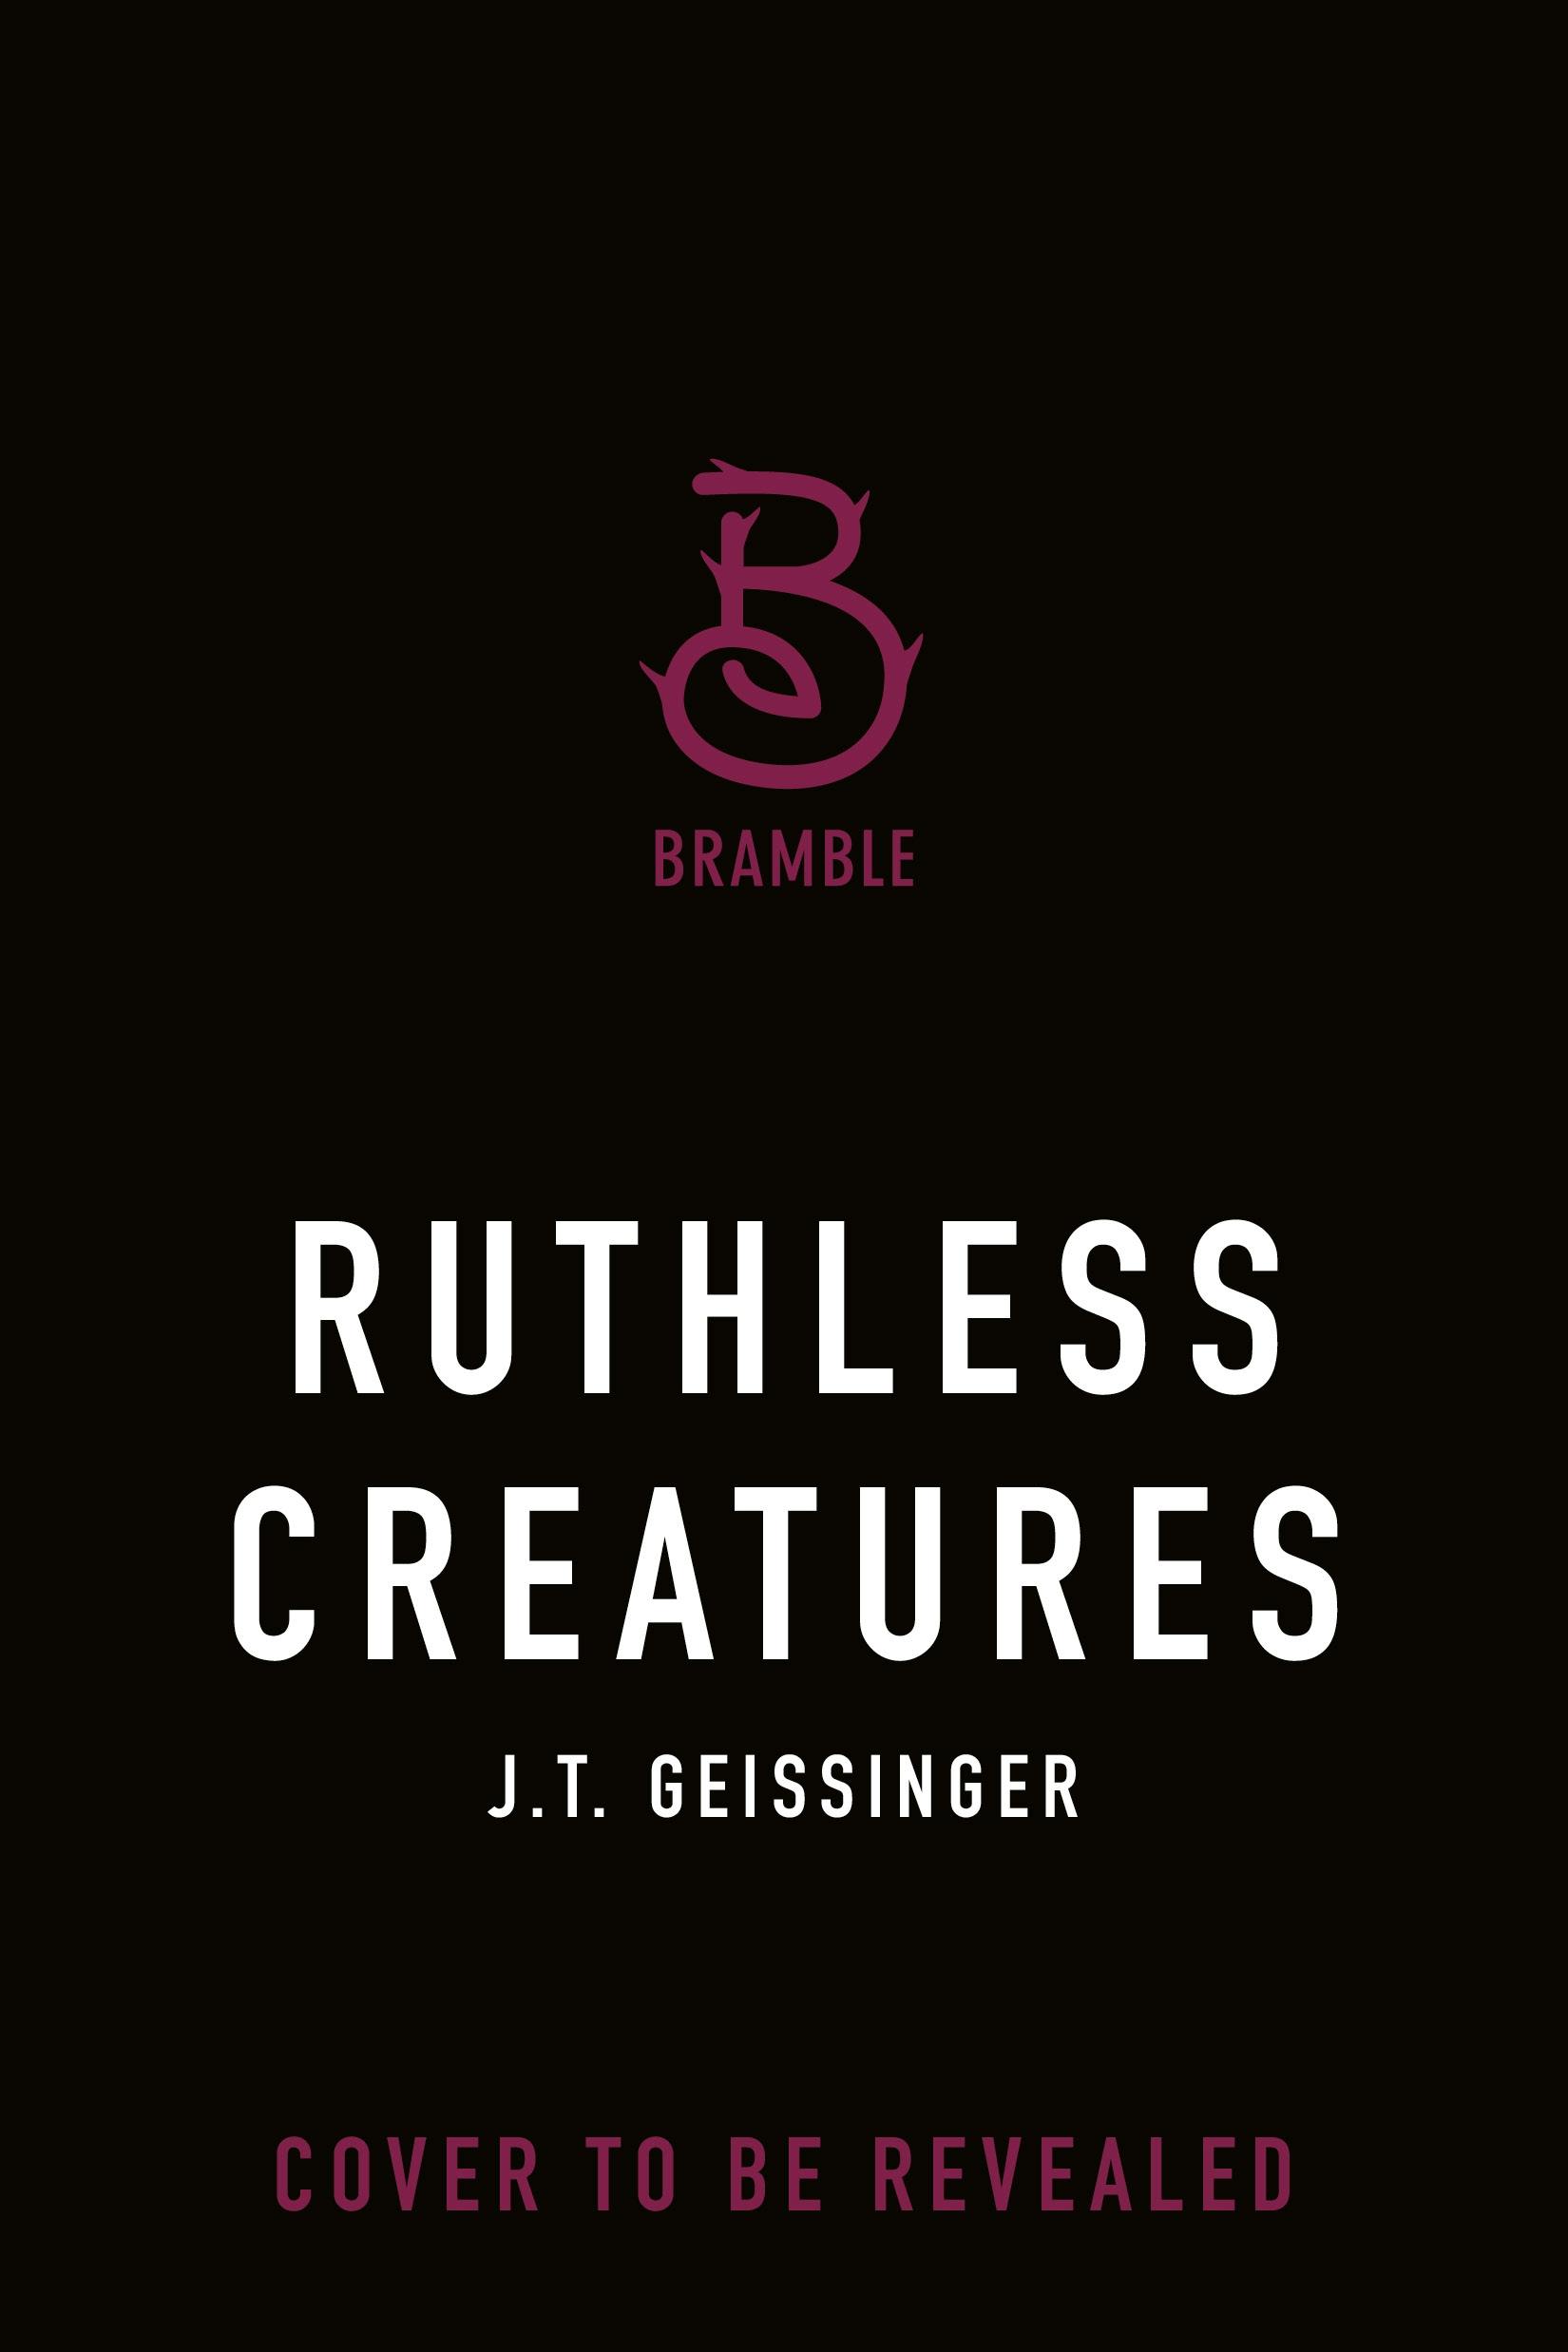 Cover for the book titled as: Ruthless Creatures